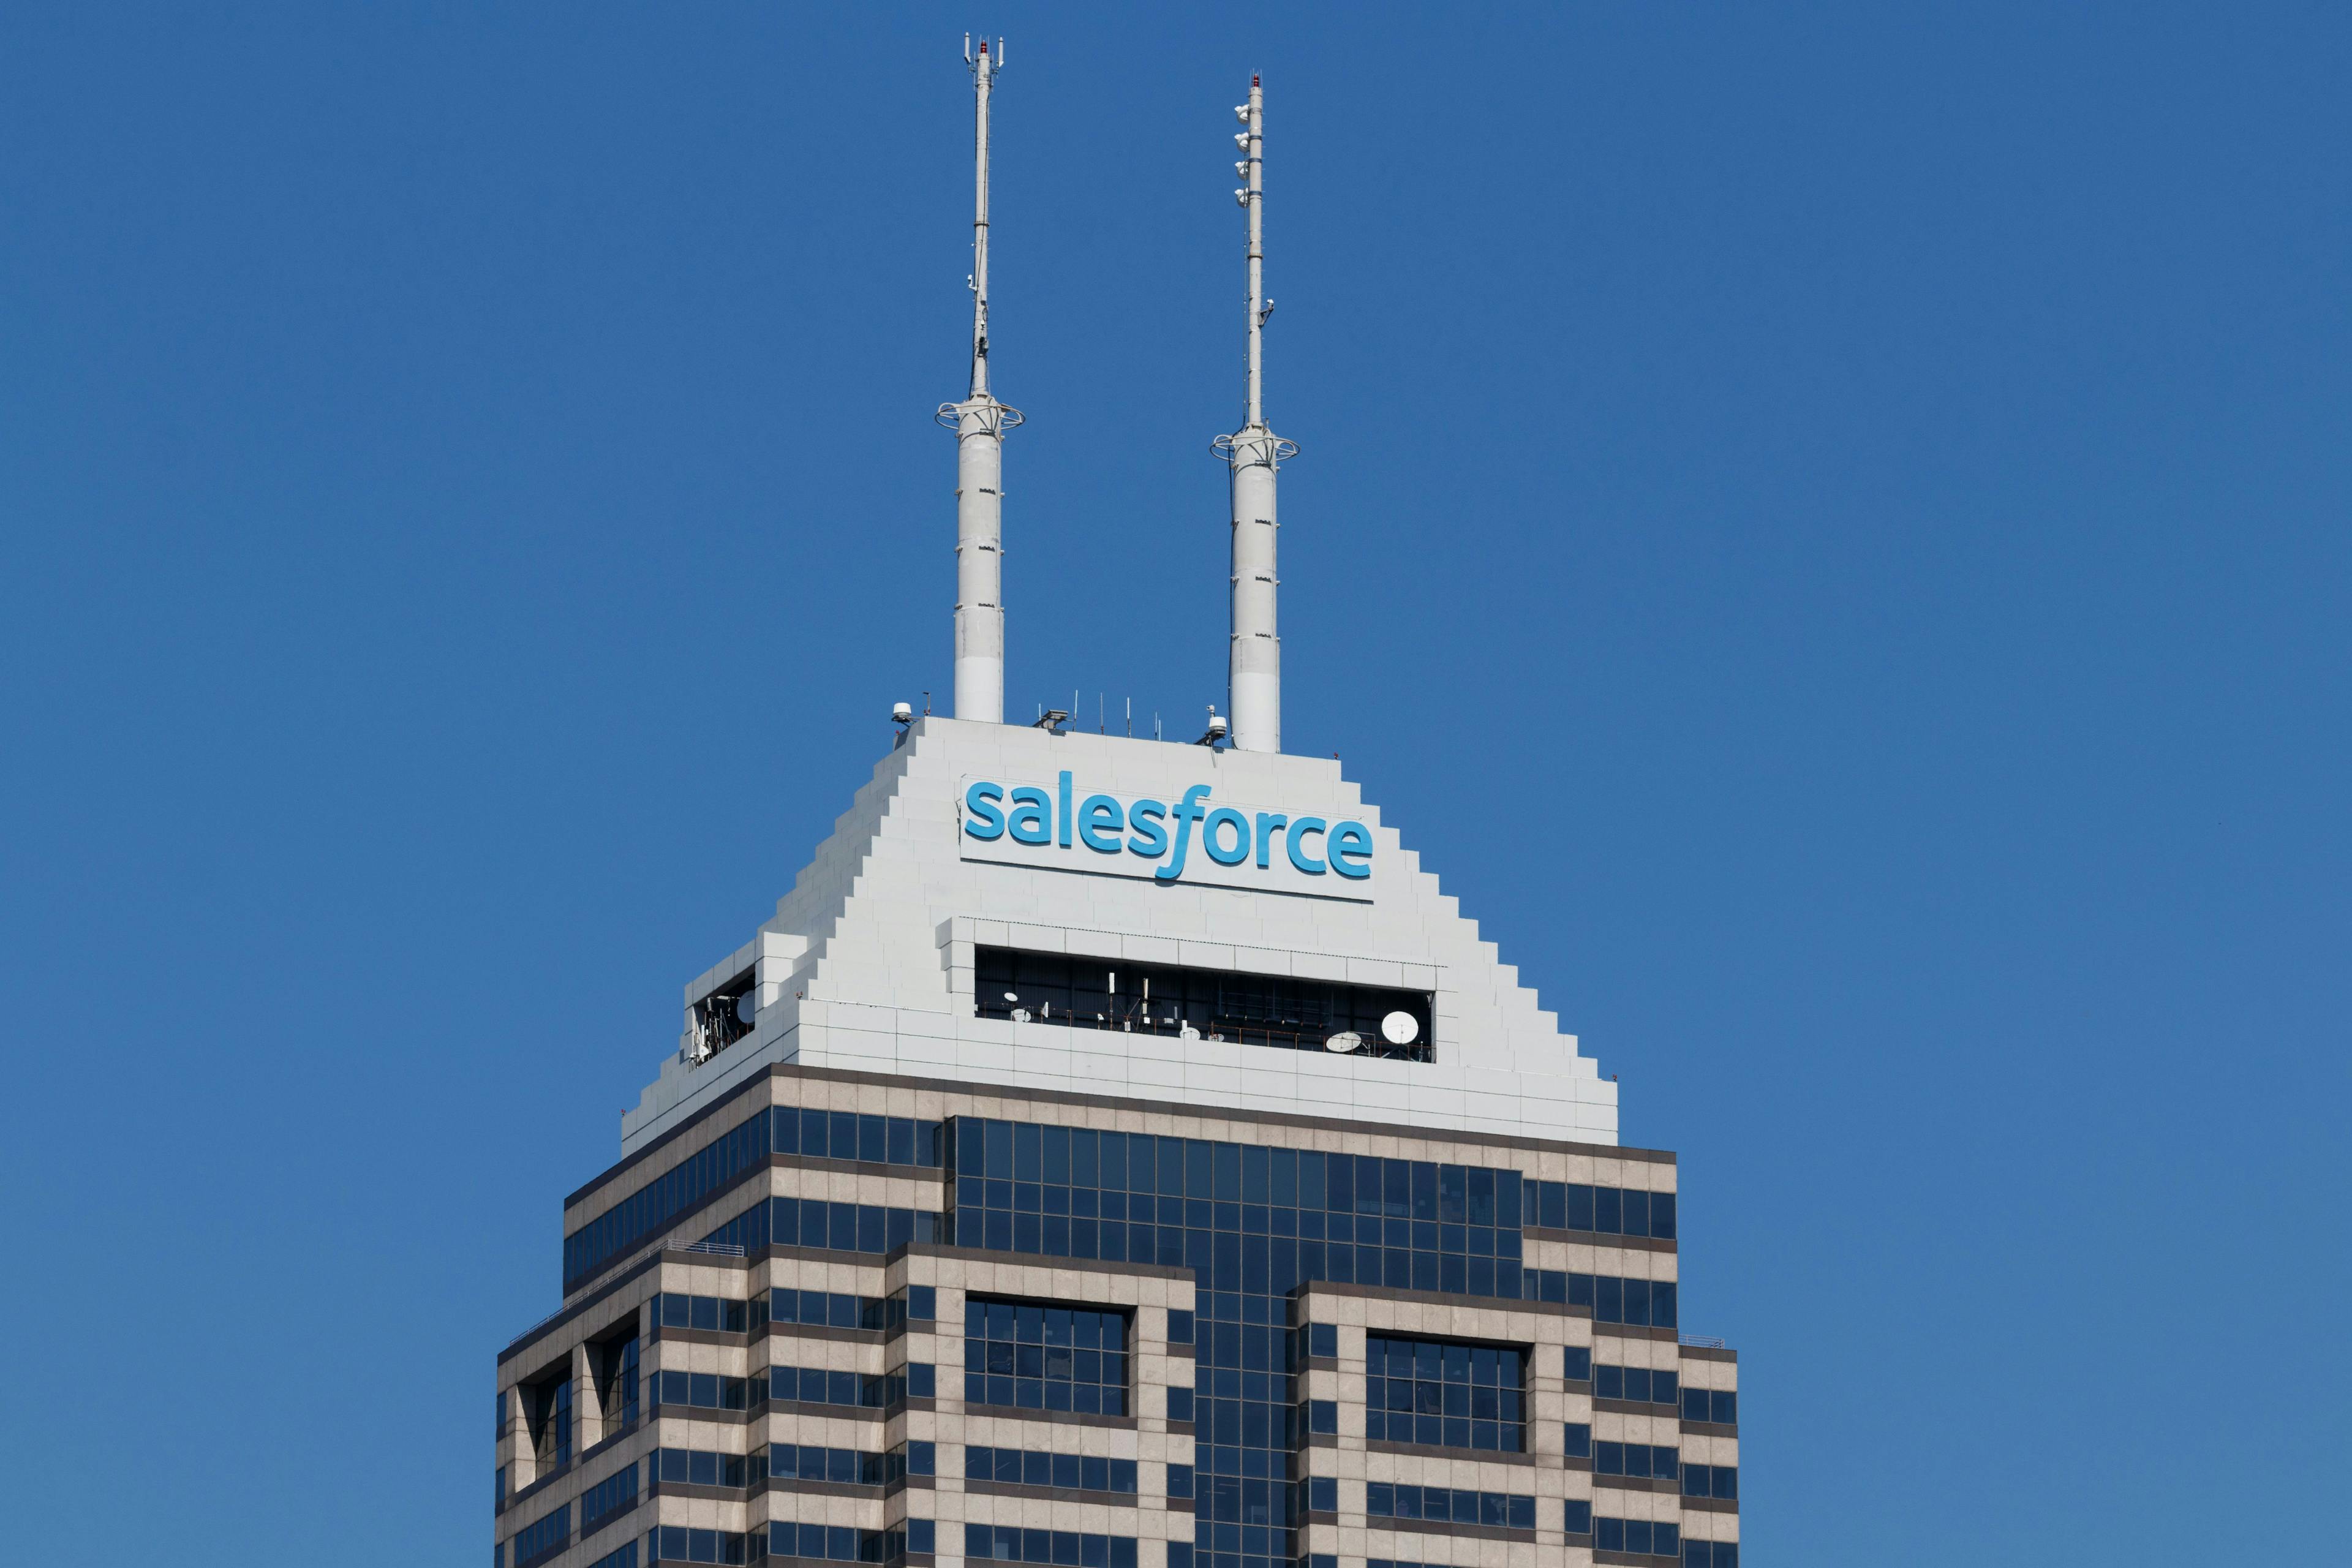 An image of a Salesforce building against a clear blue sky